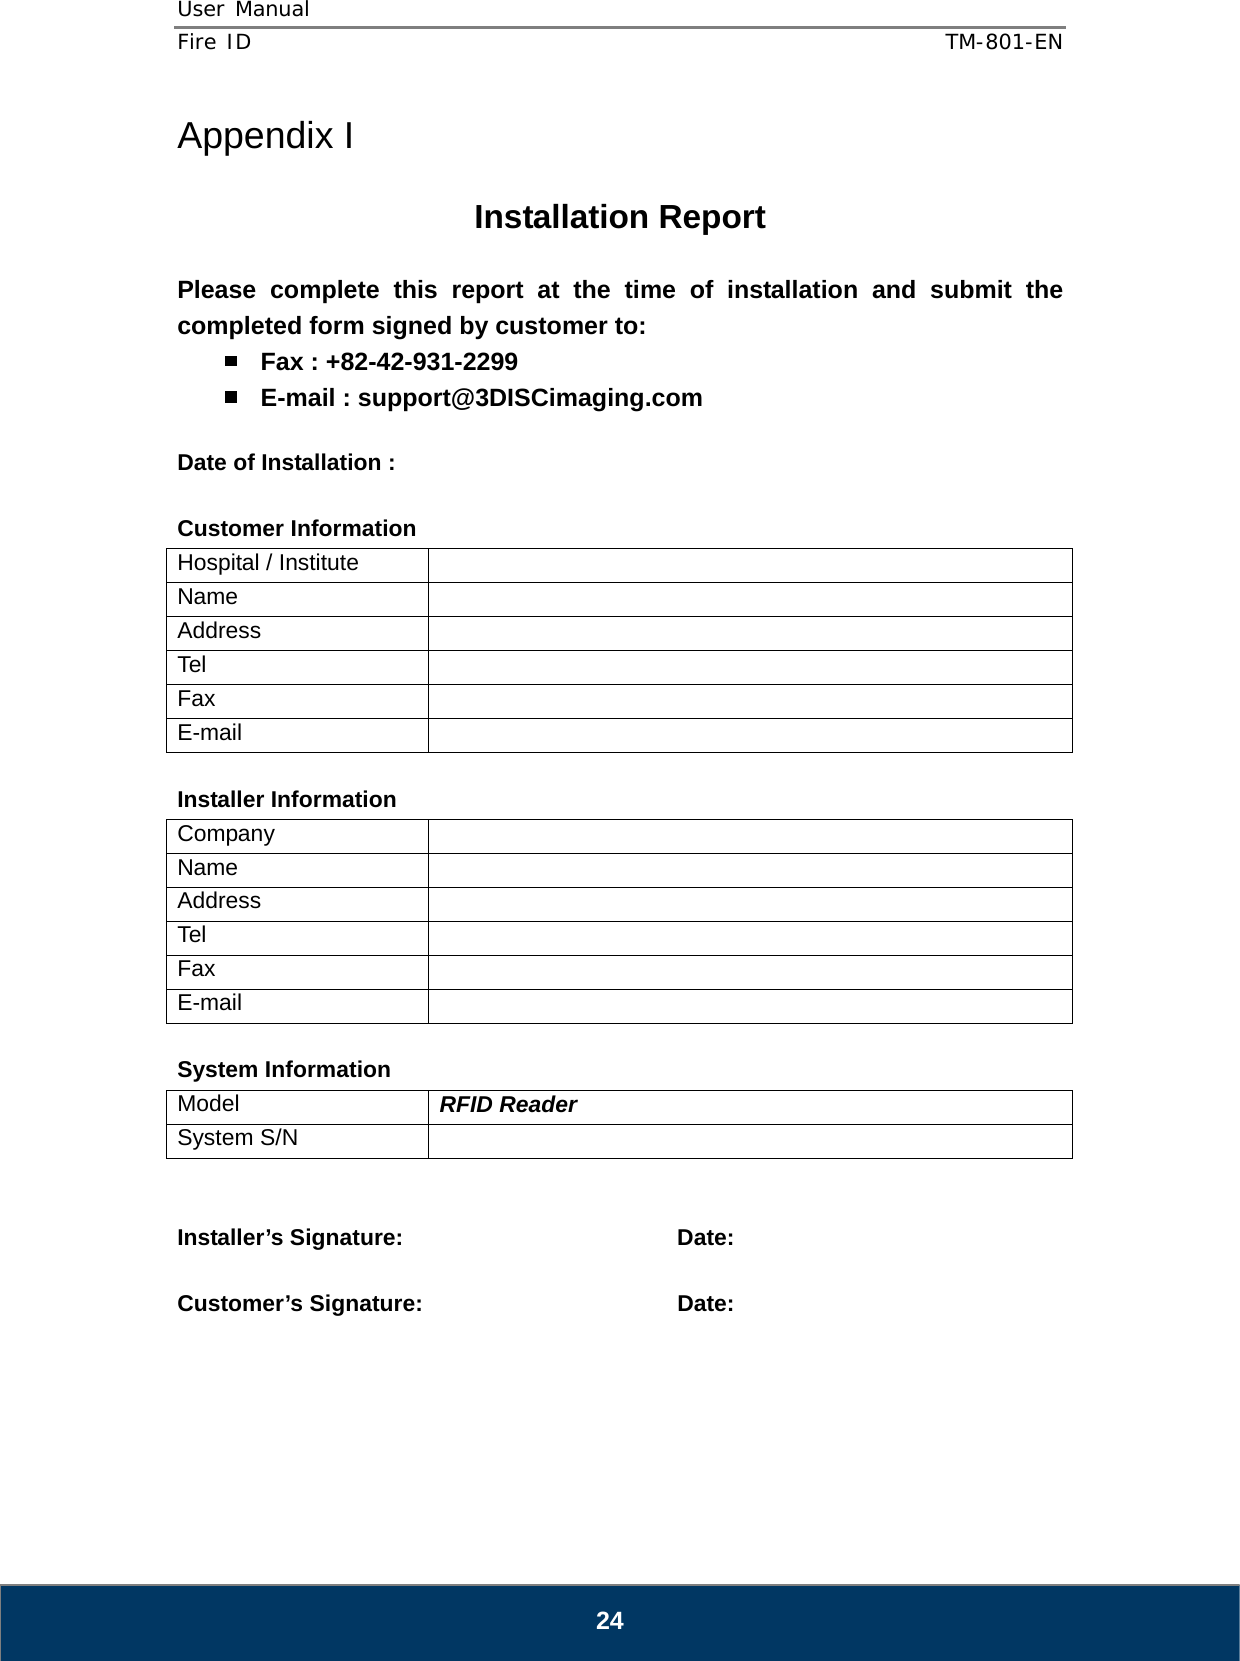 User Manual  Fire ID    TM-801-EN   24 Appendix I  Installation Report  Please complete this report at the time of installation and submit the completed form signed by customer to:  Fax : +82-42-931-2299  E-mail : support@3DISCimaging.com  Date of Installation :    Customer Information Hospital / Institute   Name  Address  Tel  Fax  E-mail   Installer Information Company  Name  Address  Tel  Fax  E-mail   System Information Model  RFID Reader System S/N     Installer’s Signature:    Date:  Customer’s Signature:       Date:      